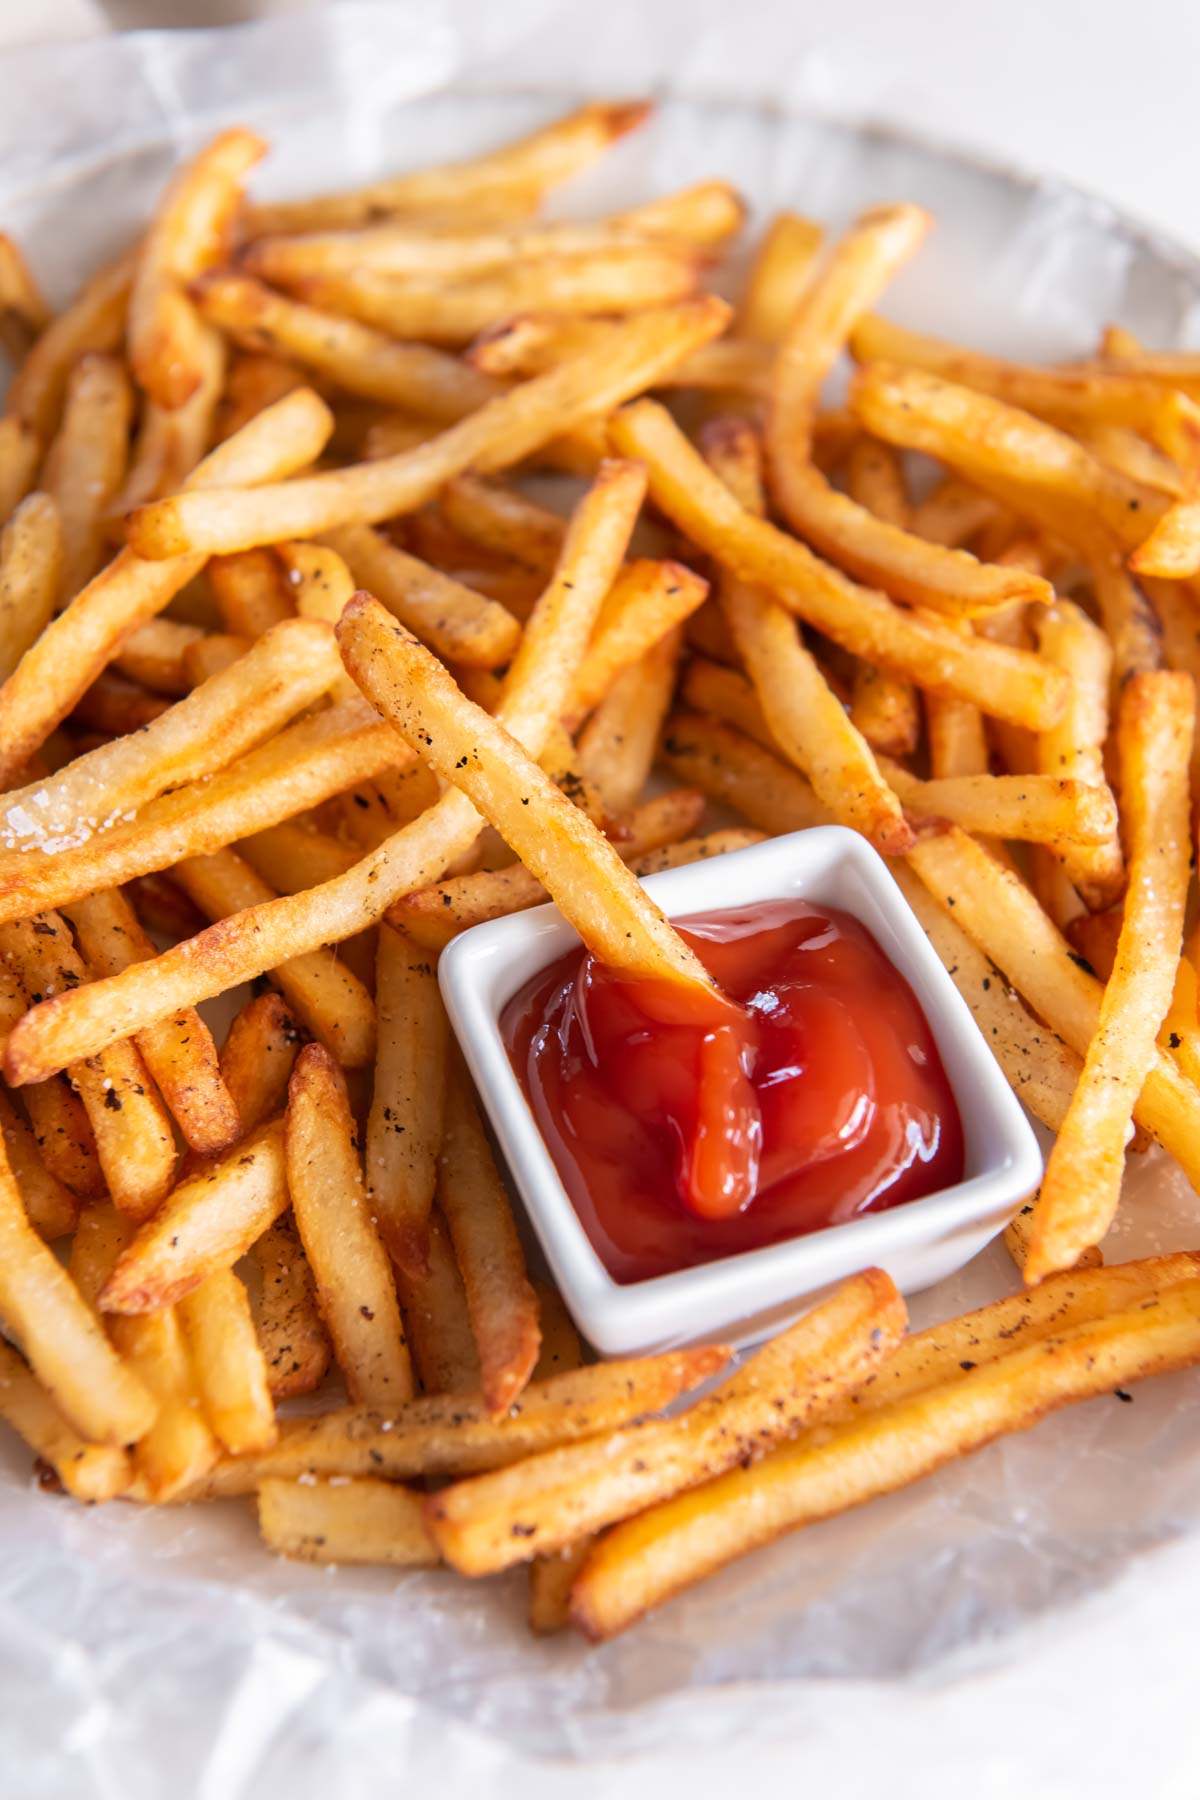 Air fried frozen french fries served with ketchup with one fry in ketchup dish.